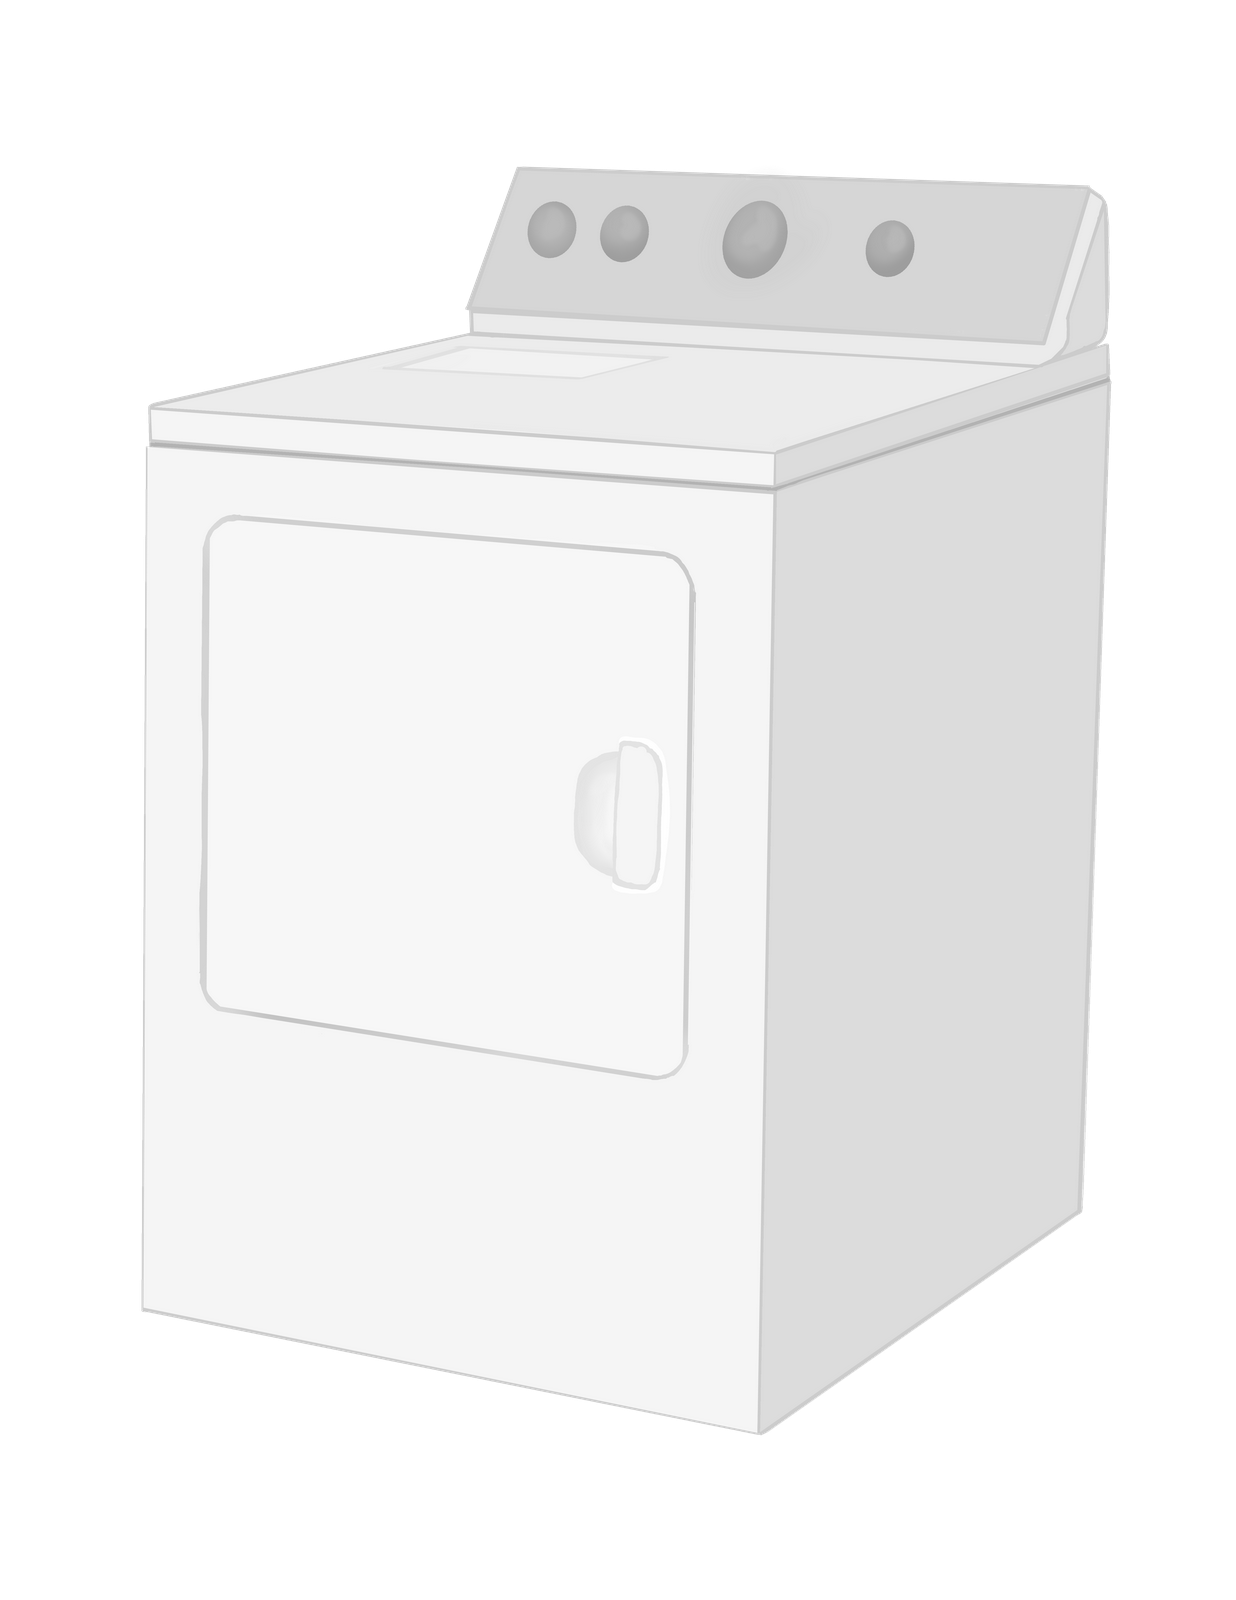 Appliance repair and appliance parts in Montreal